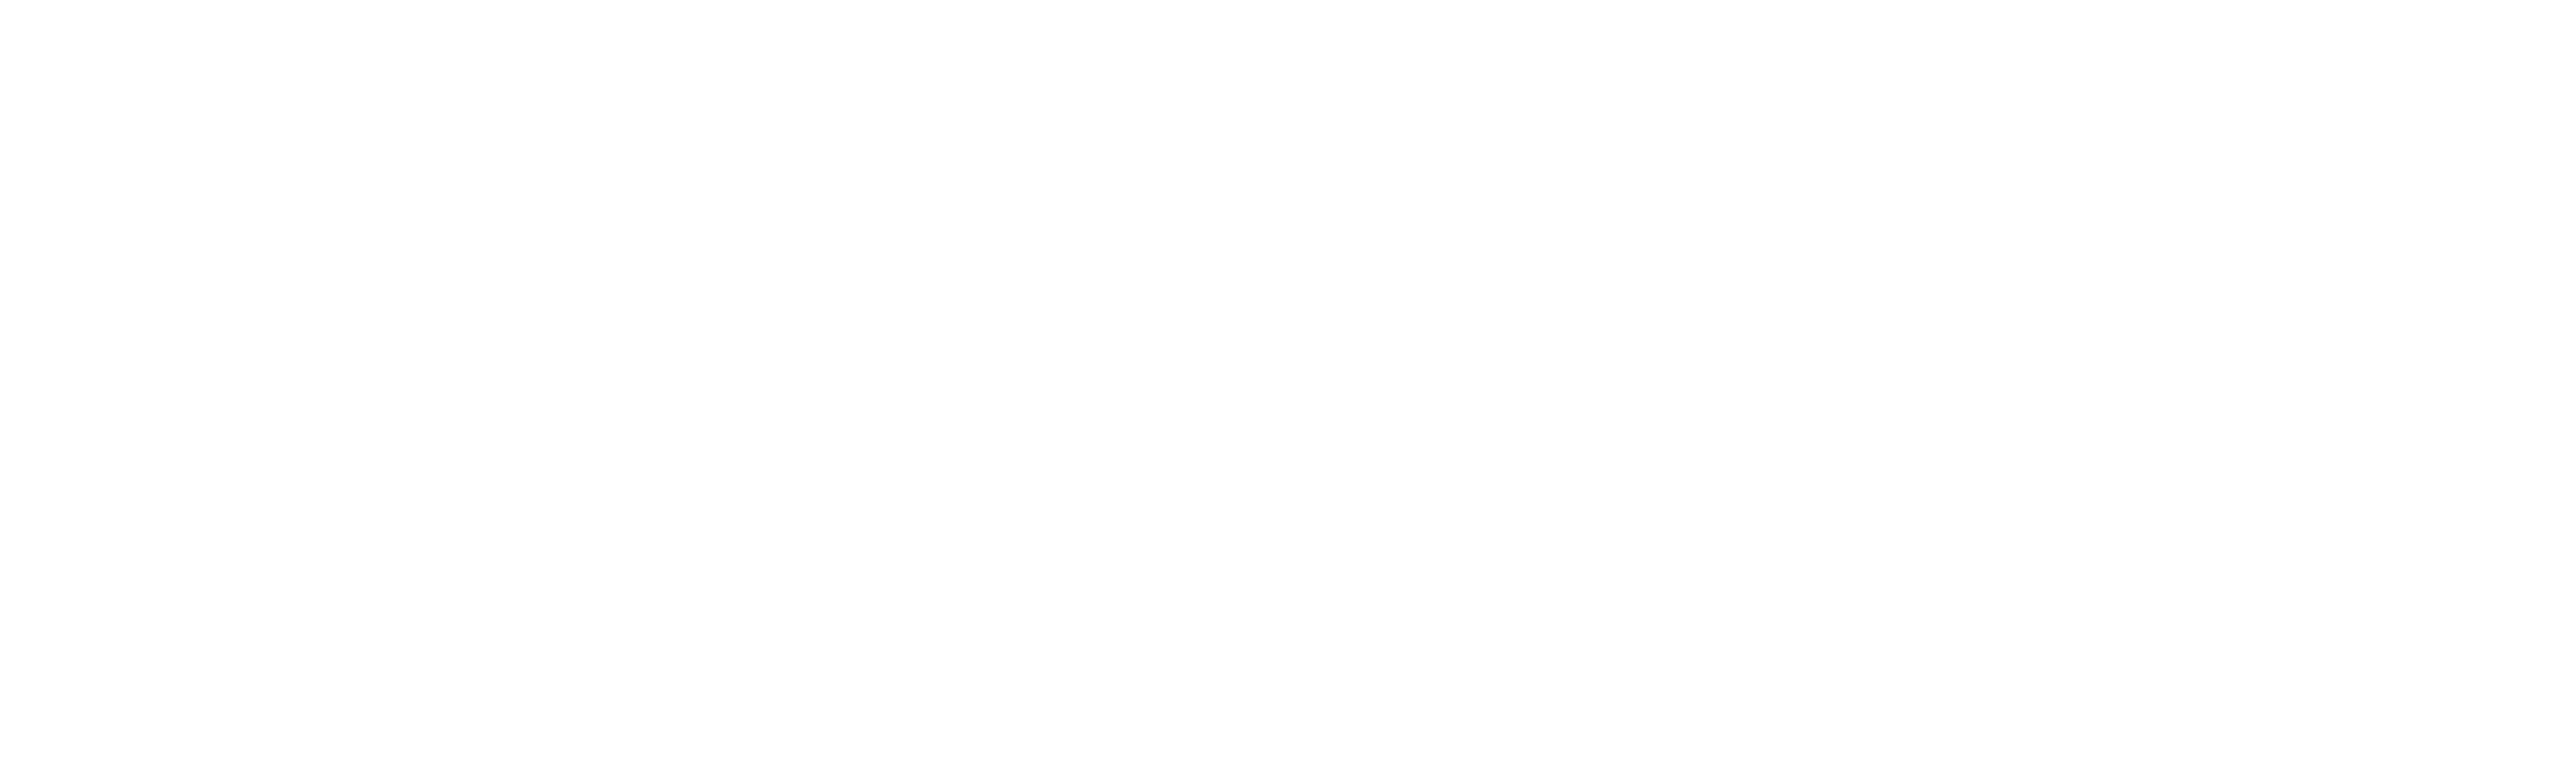 House of Furniture